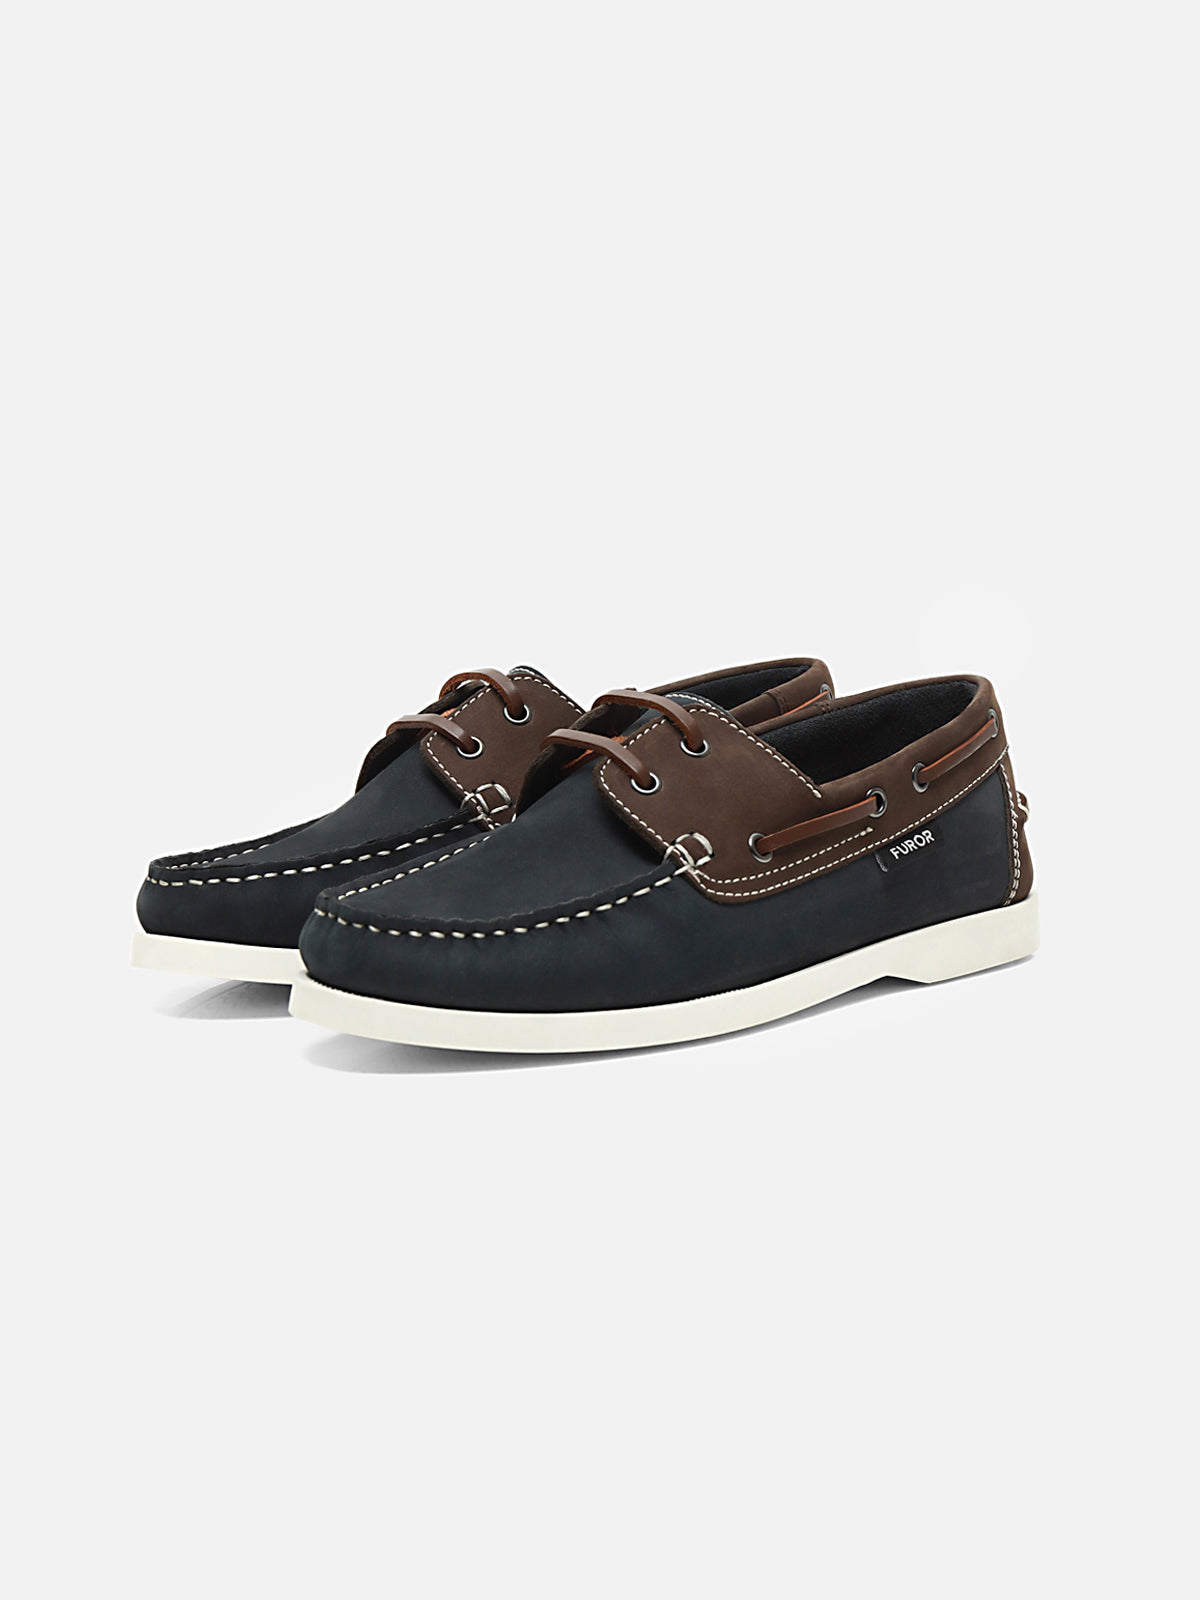 Leather Boat Shoe - FAMS24-033